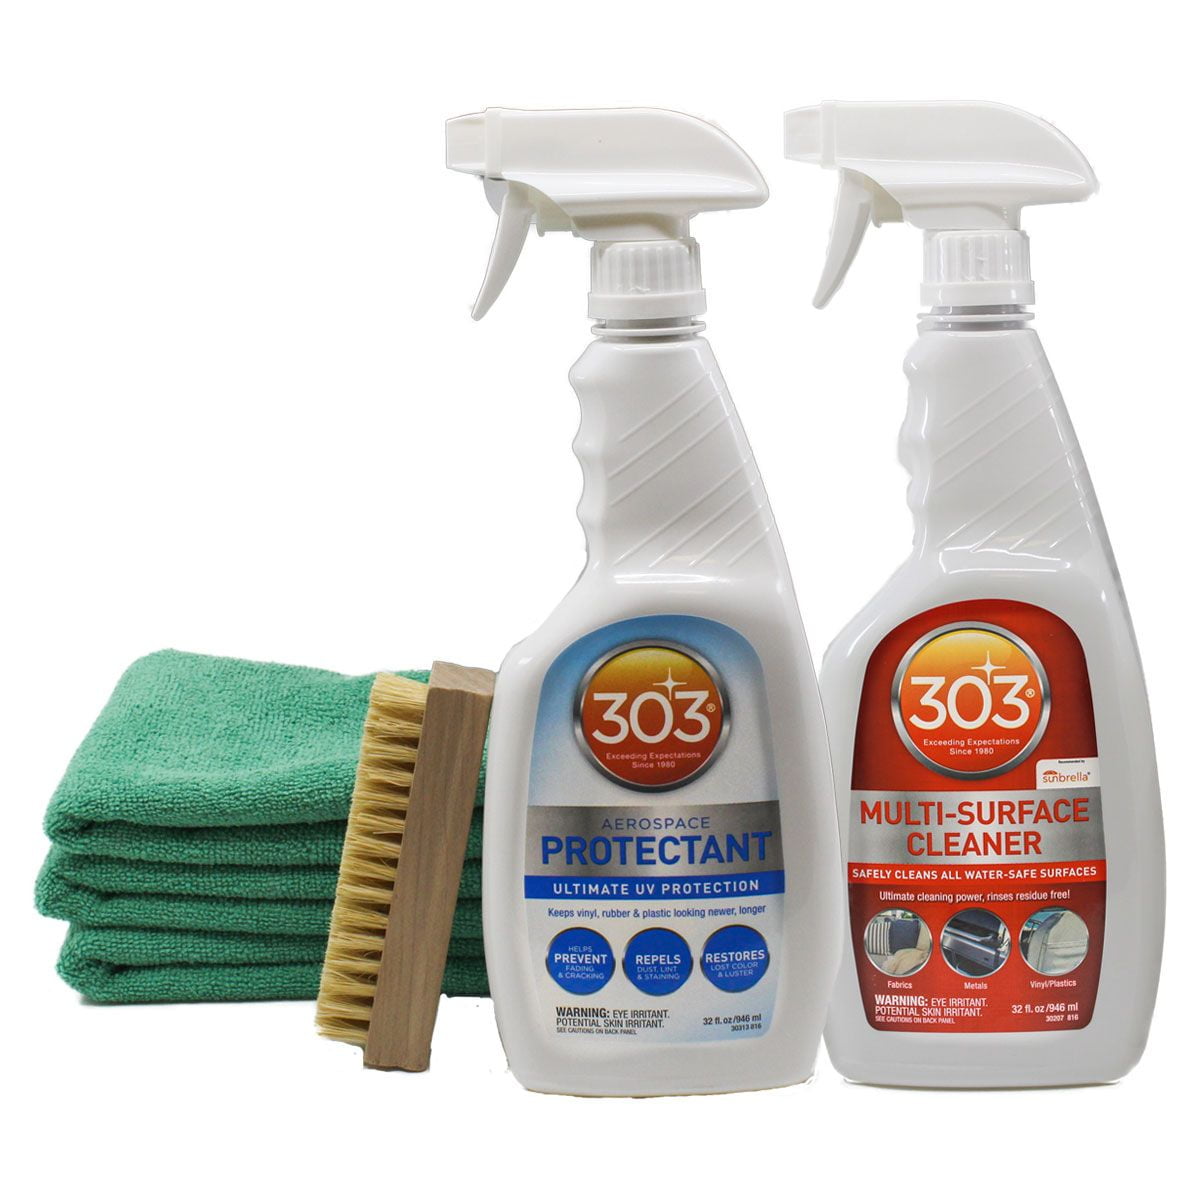 303 Aerospace Protectant & Cleaner 6 Piece Kit